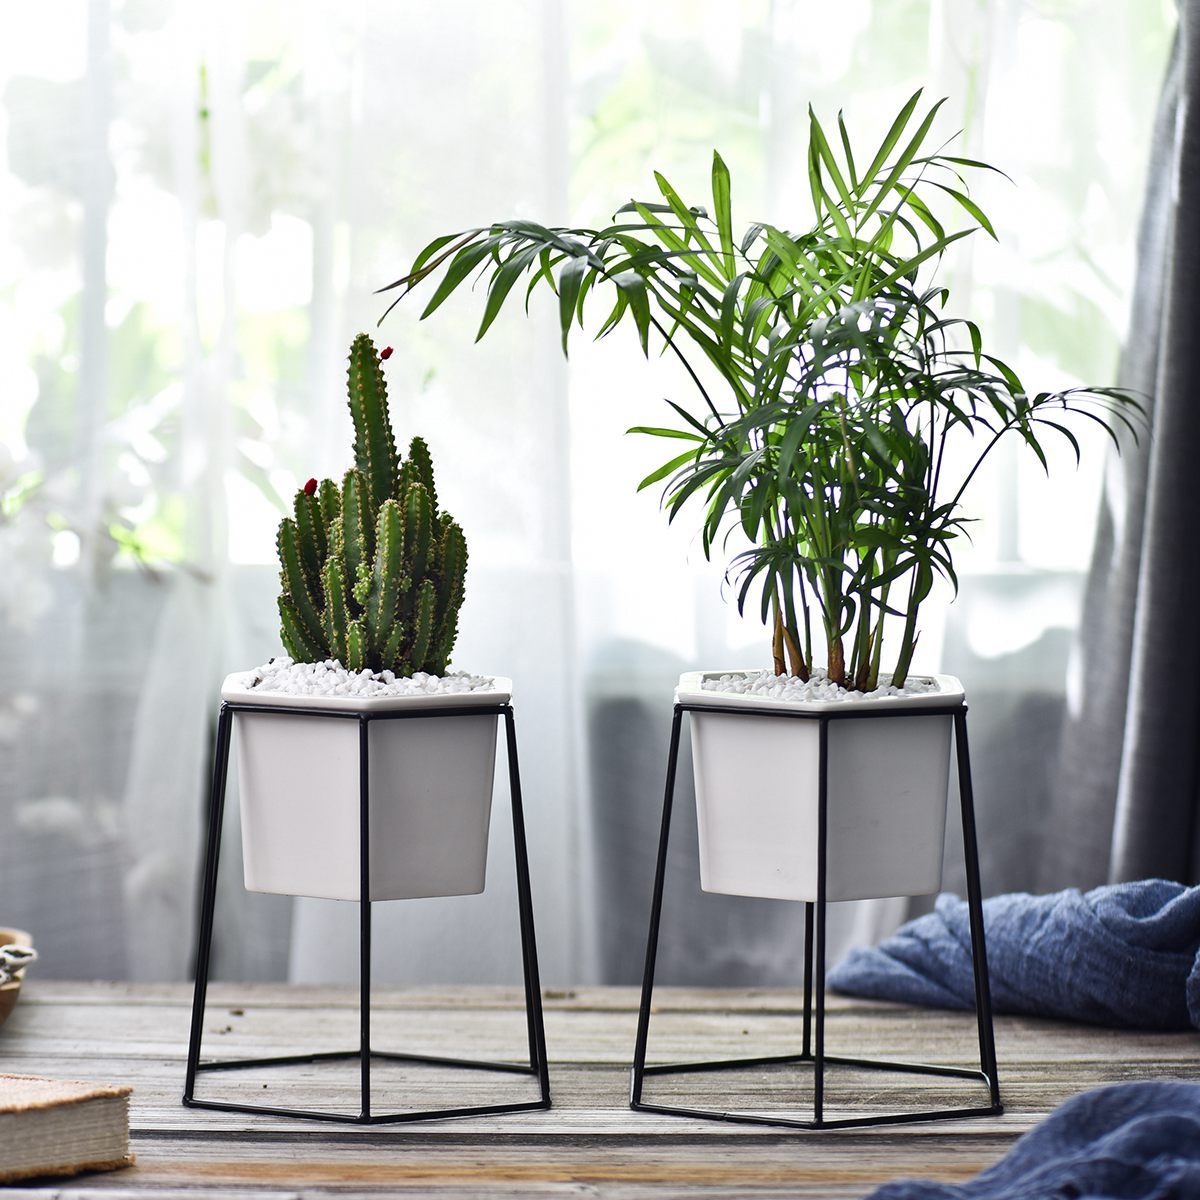 Dynesty - Hexagon Ceramic Planter & Stand - Nordic Side - 09-28, feed-cl1-planters, modern-pieces, modern-planter-collection